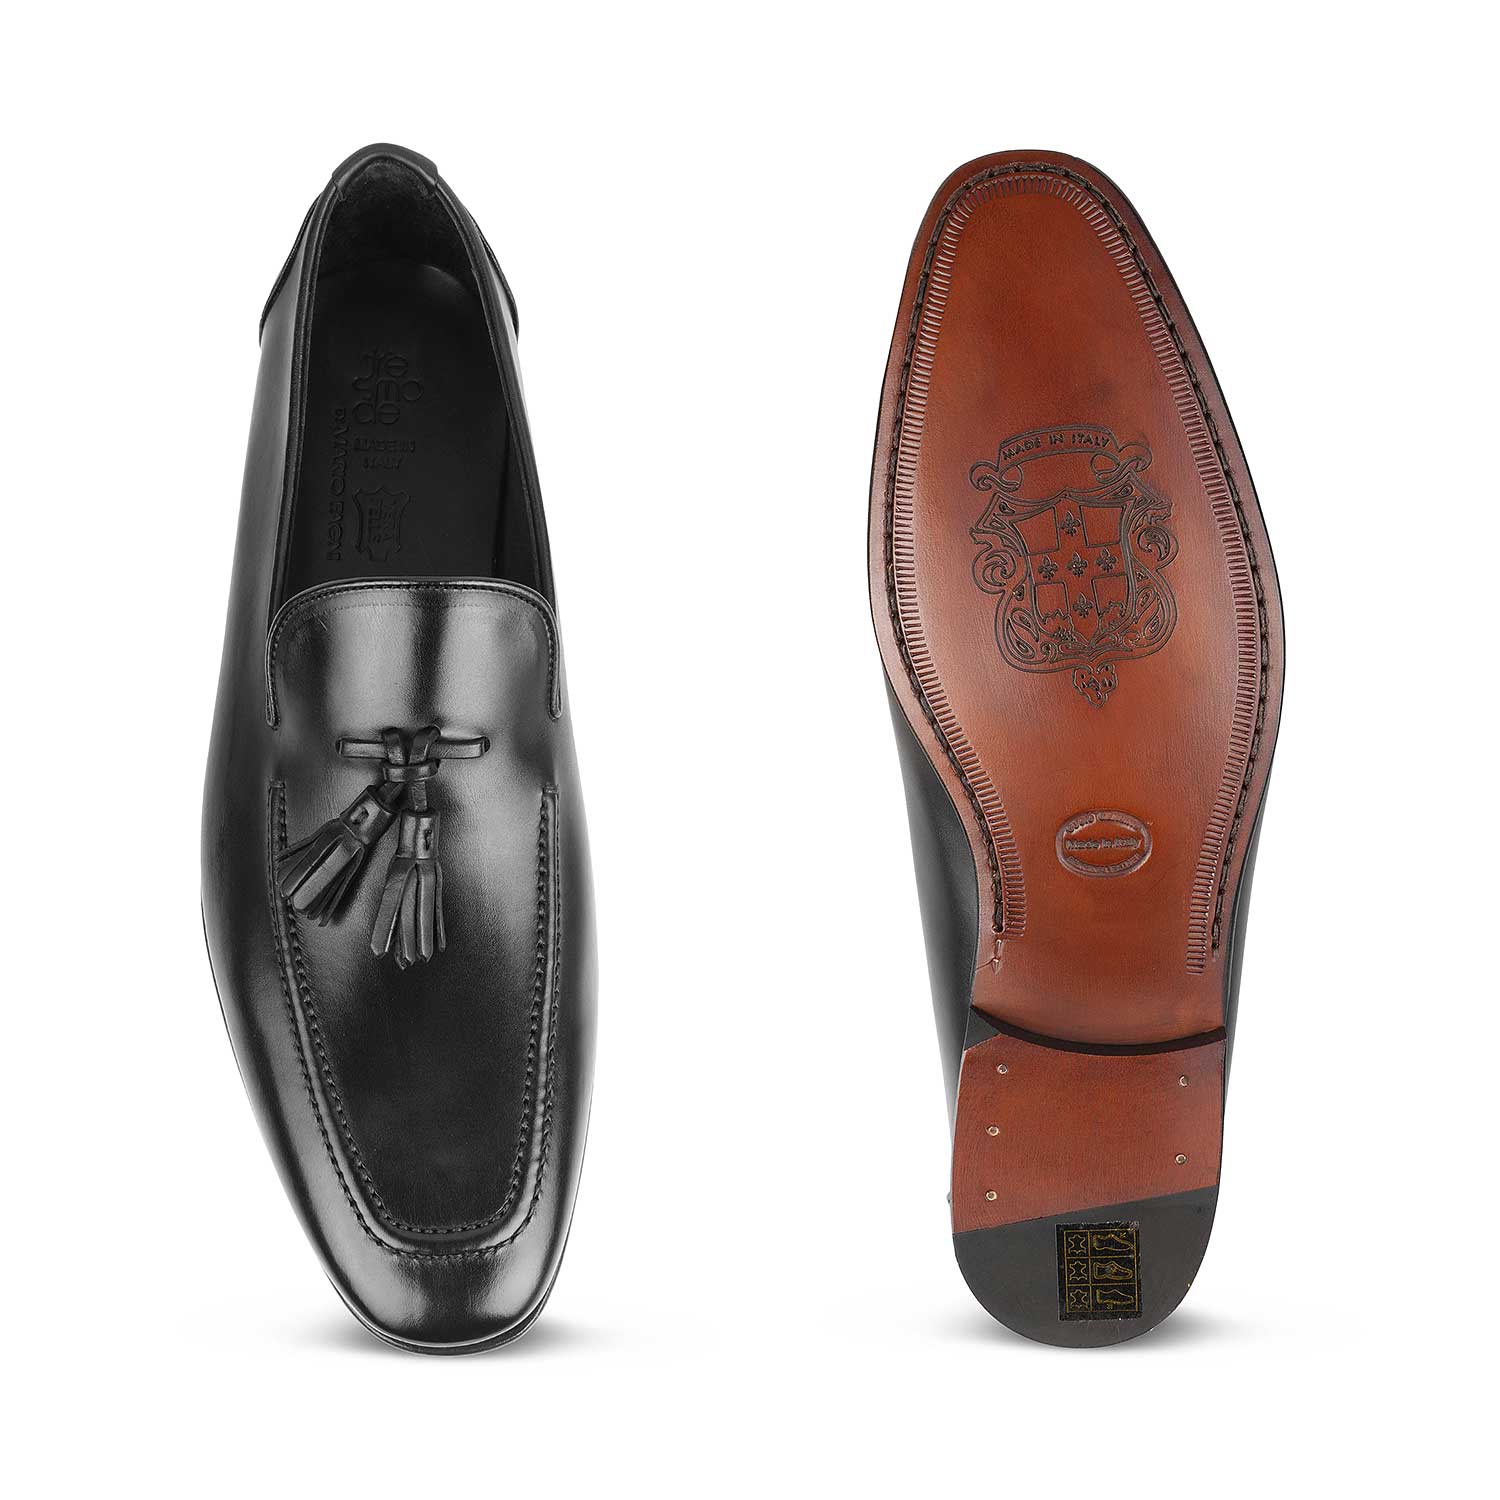 The Maffeo Black Men's Handcrafted Leather Loafers Tresmode